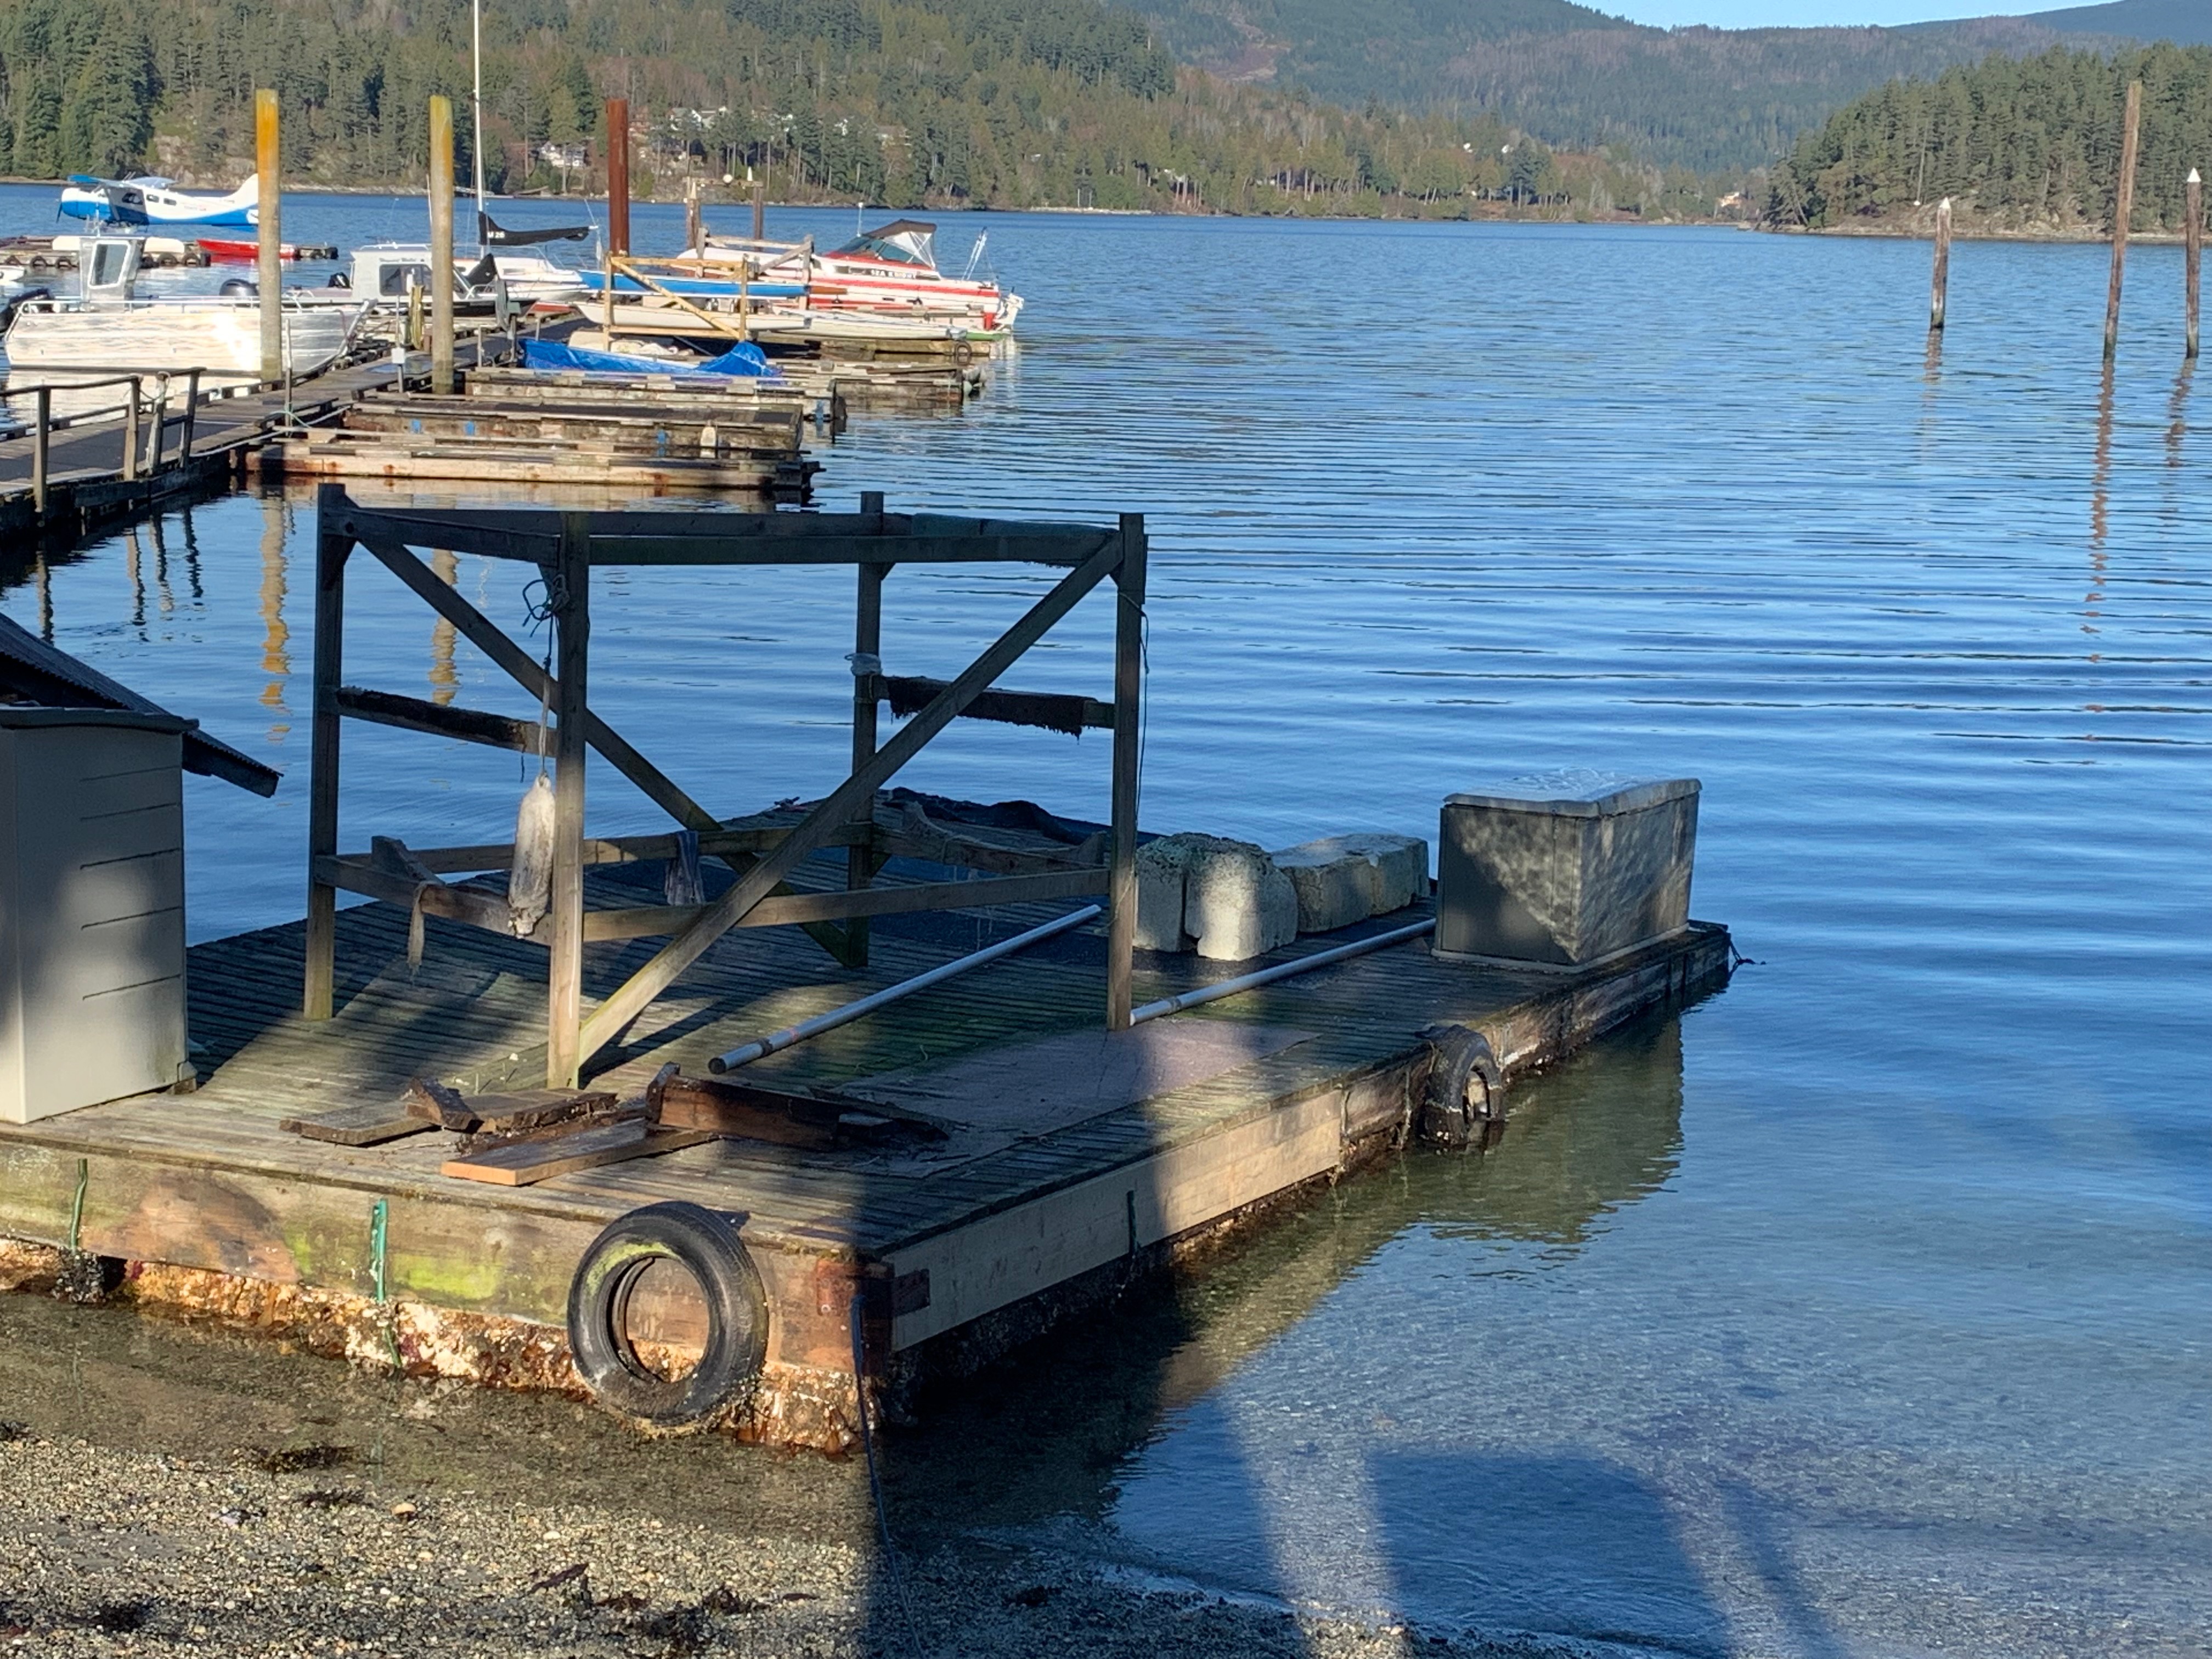 One of our three floats on the shore of Porpoise Bay.